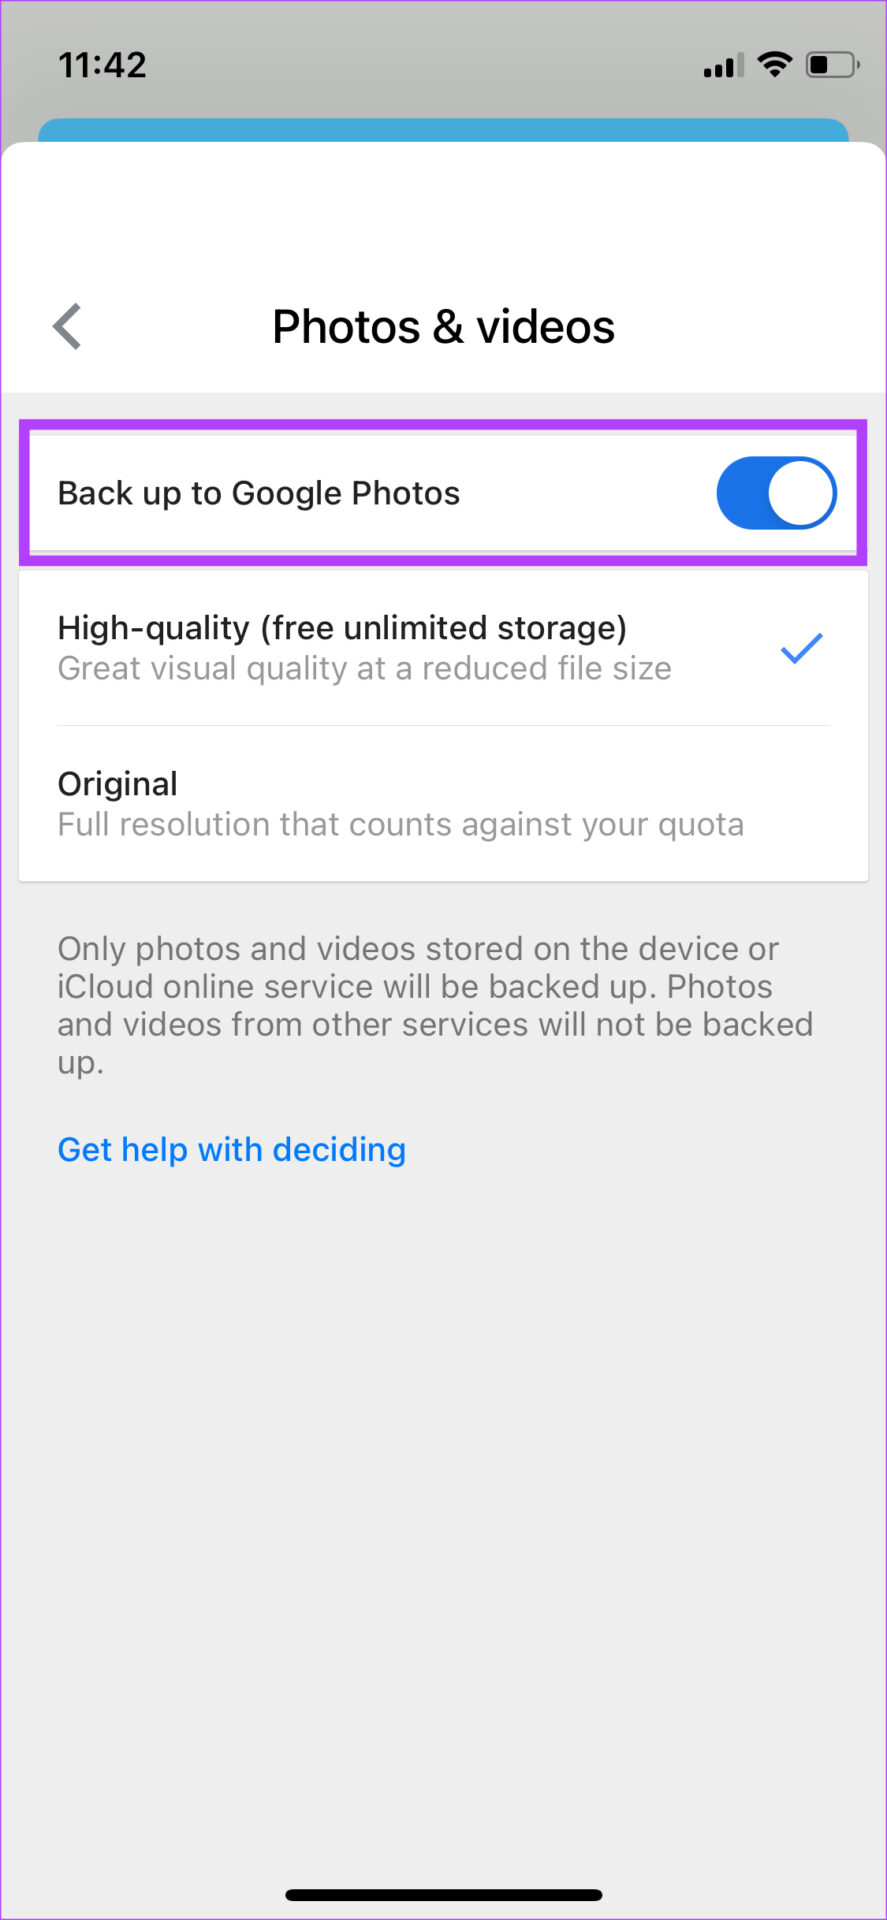 Enable back up of photos and videos